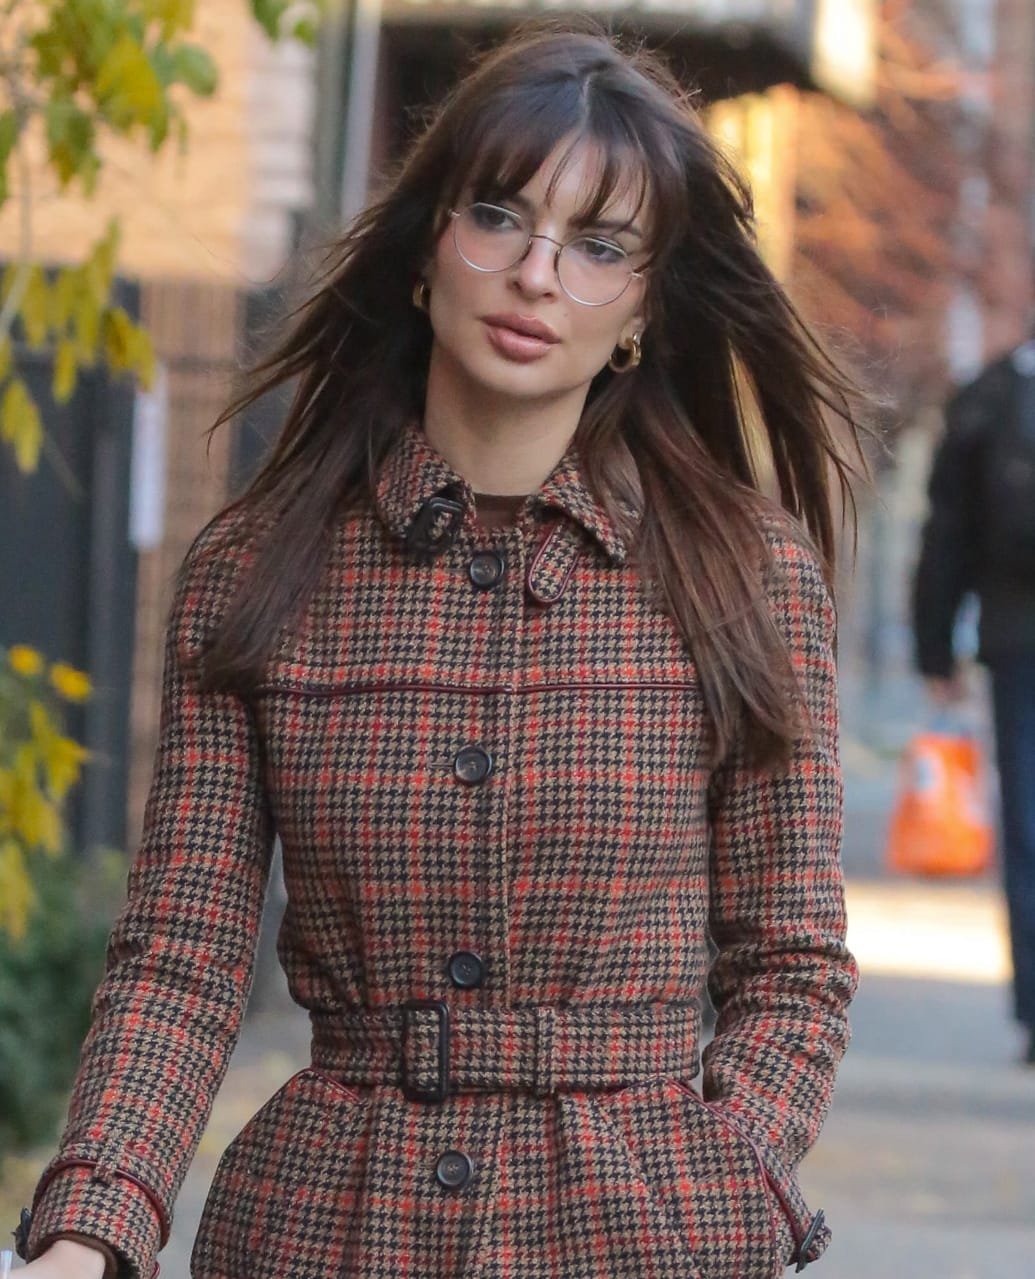 Emily Ratajkowski brings a sultry finish to her winter ensemble by wearing prescription glasses and letting her brown hair fall loosely around her shoulders